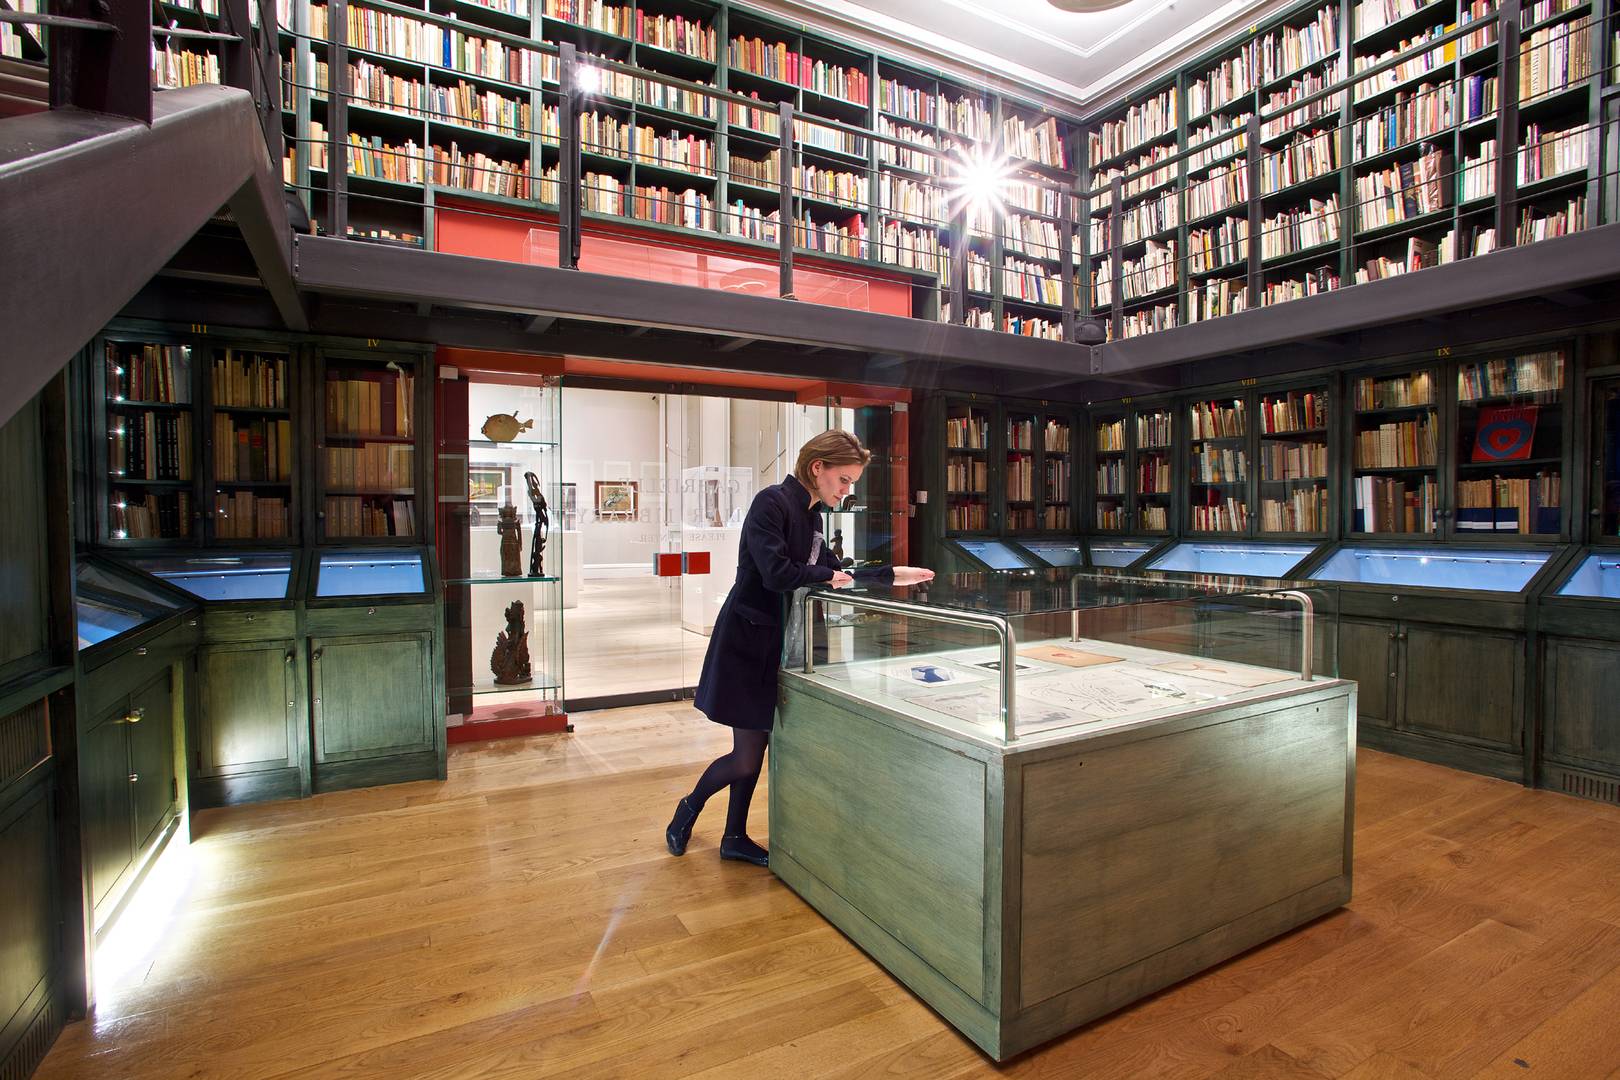 A woman in the art gallery library, National Galleries Scotland